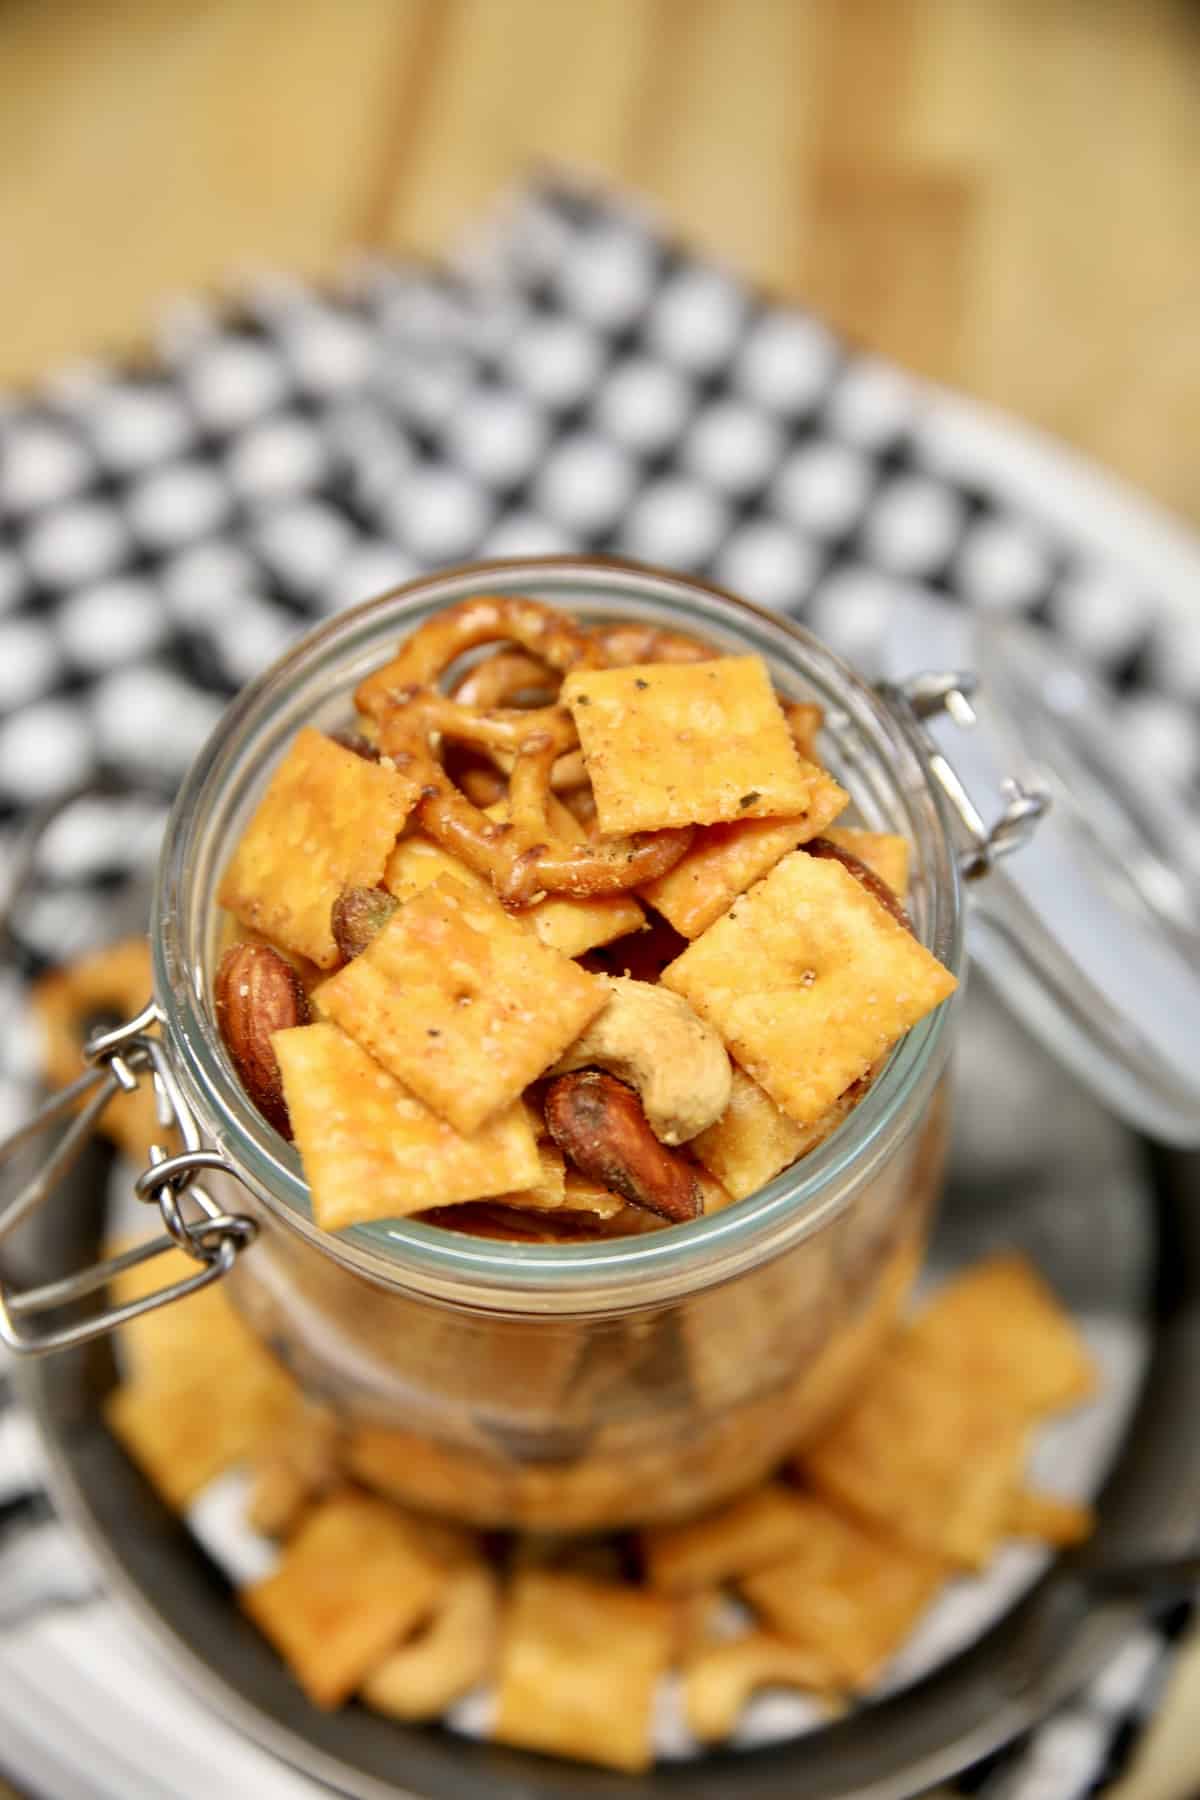 Jar of snack mix with cheese crackers and nuts.